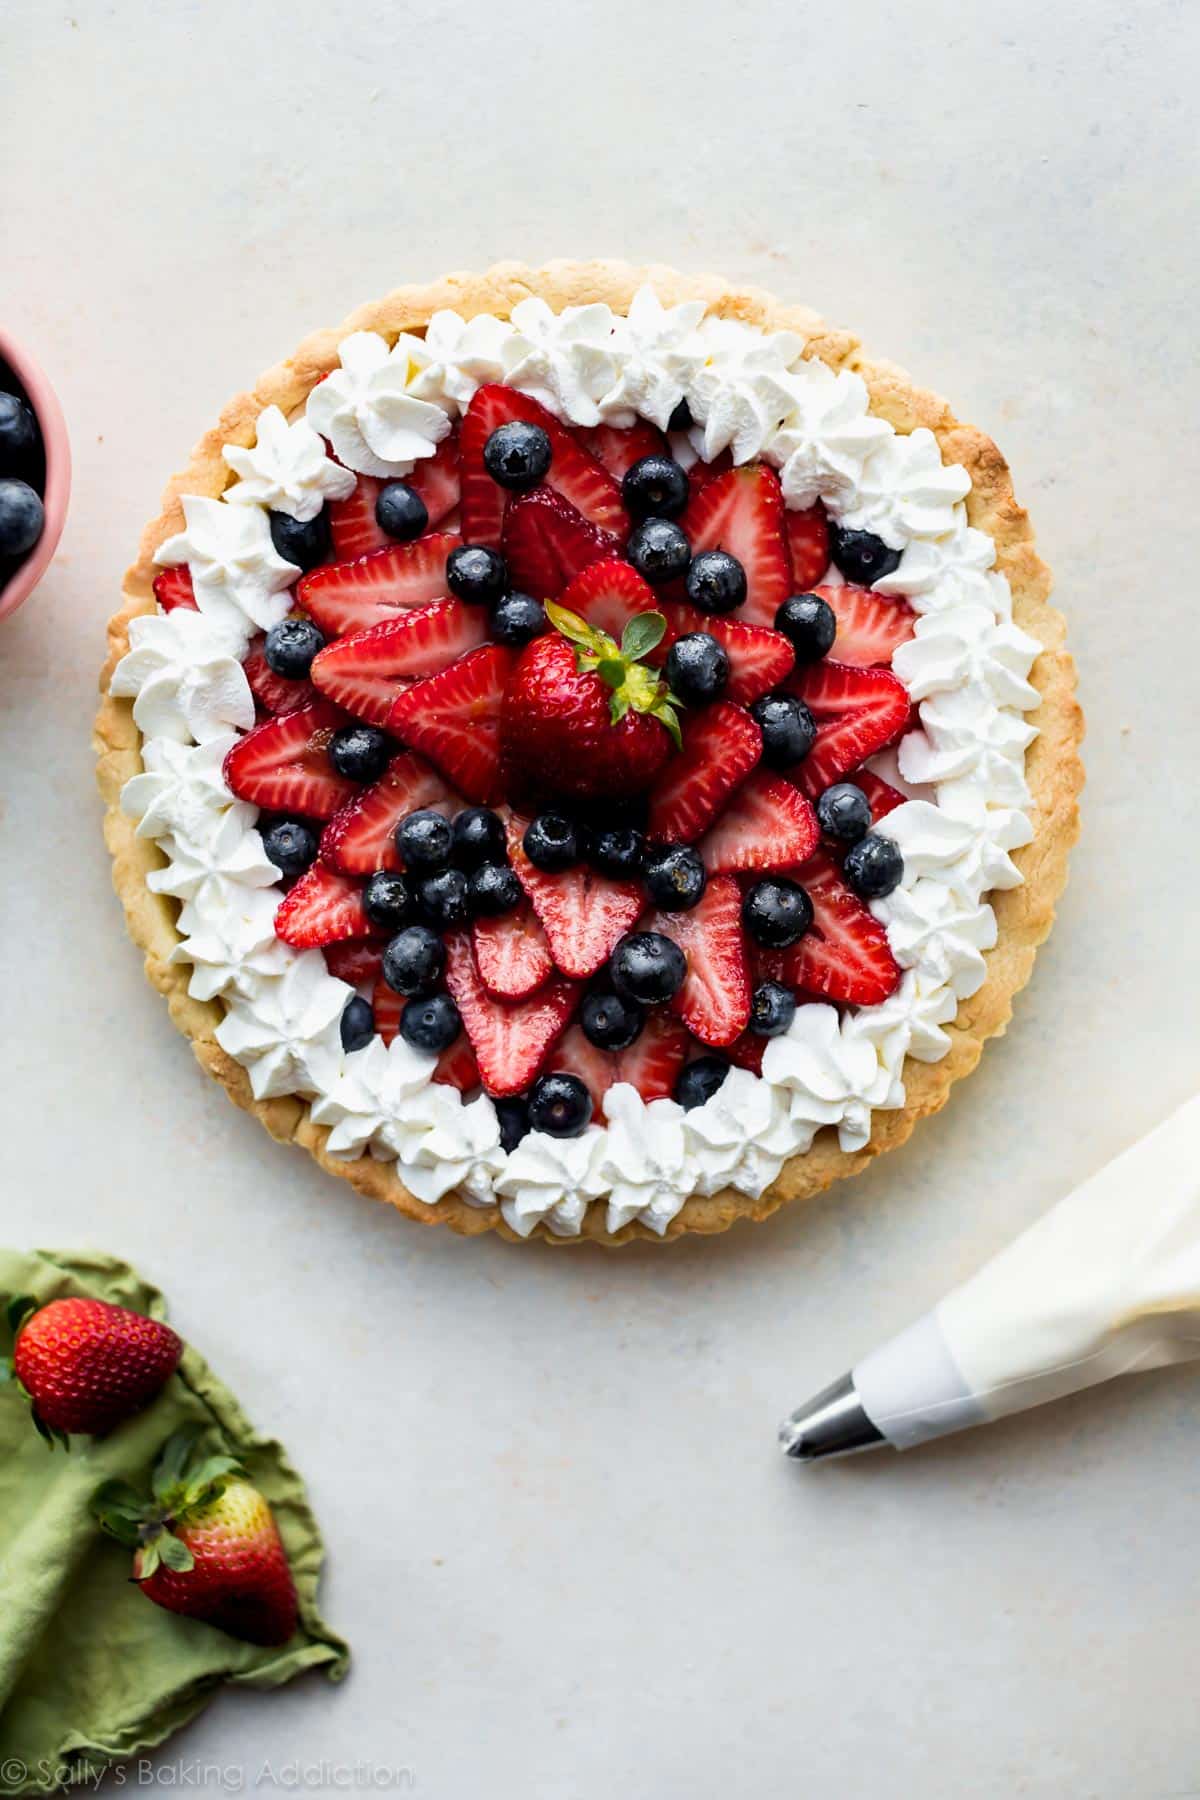 Fruit tart with strawberries and blueberries